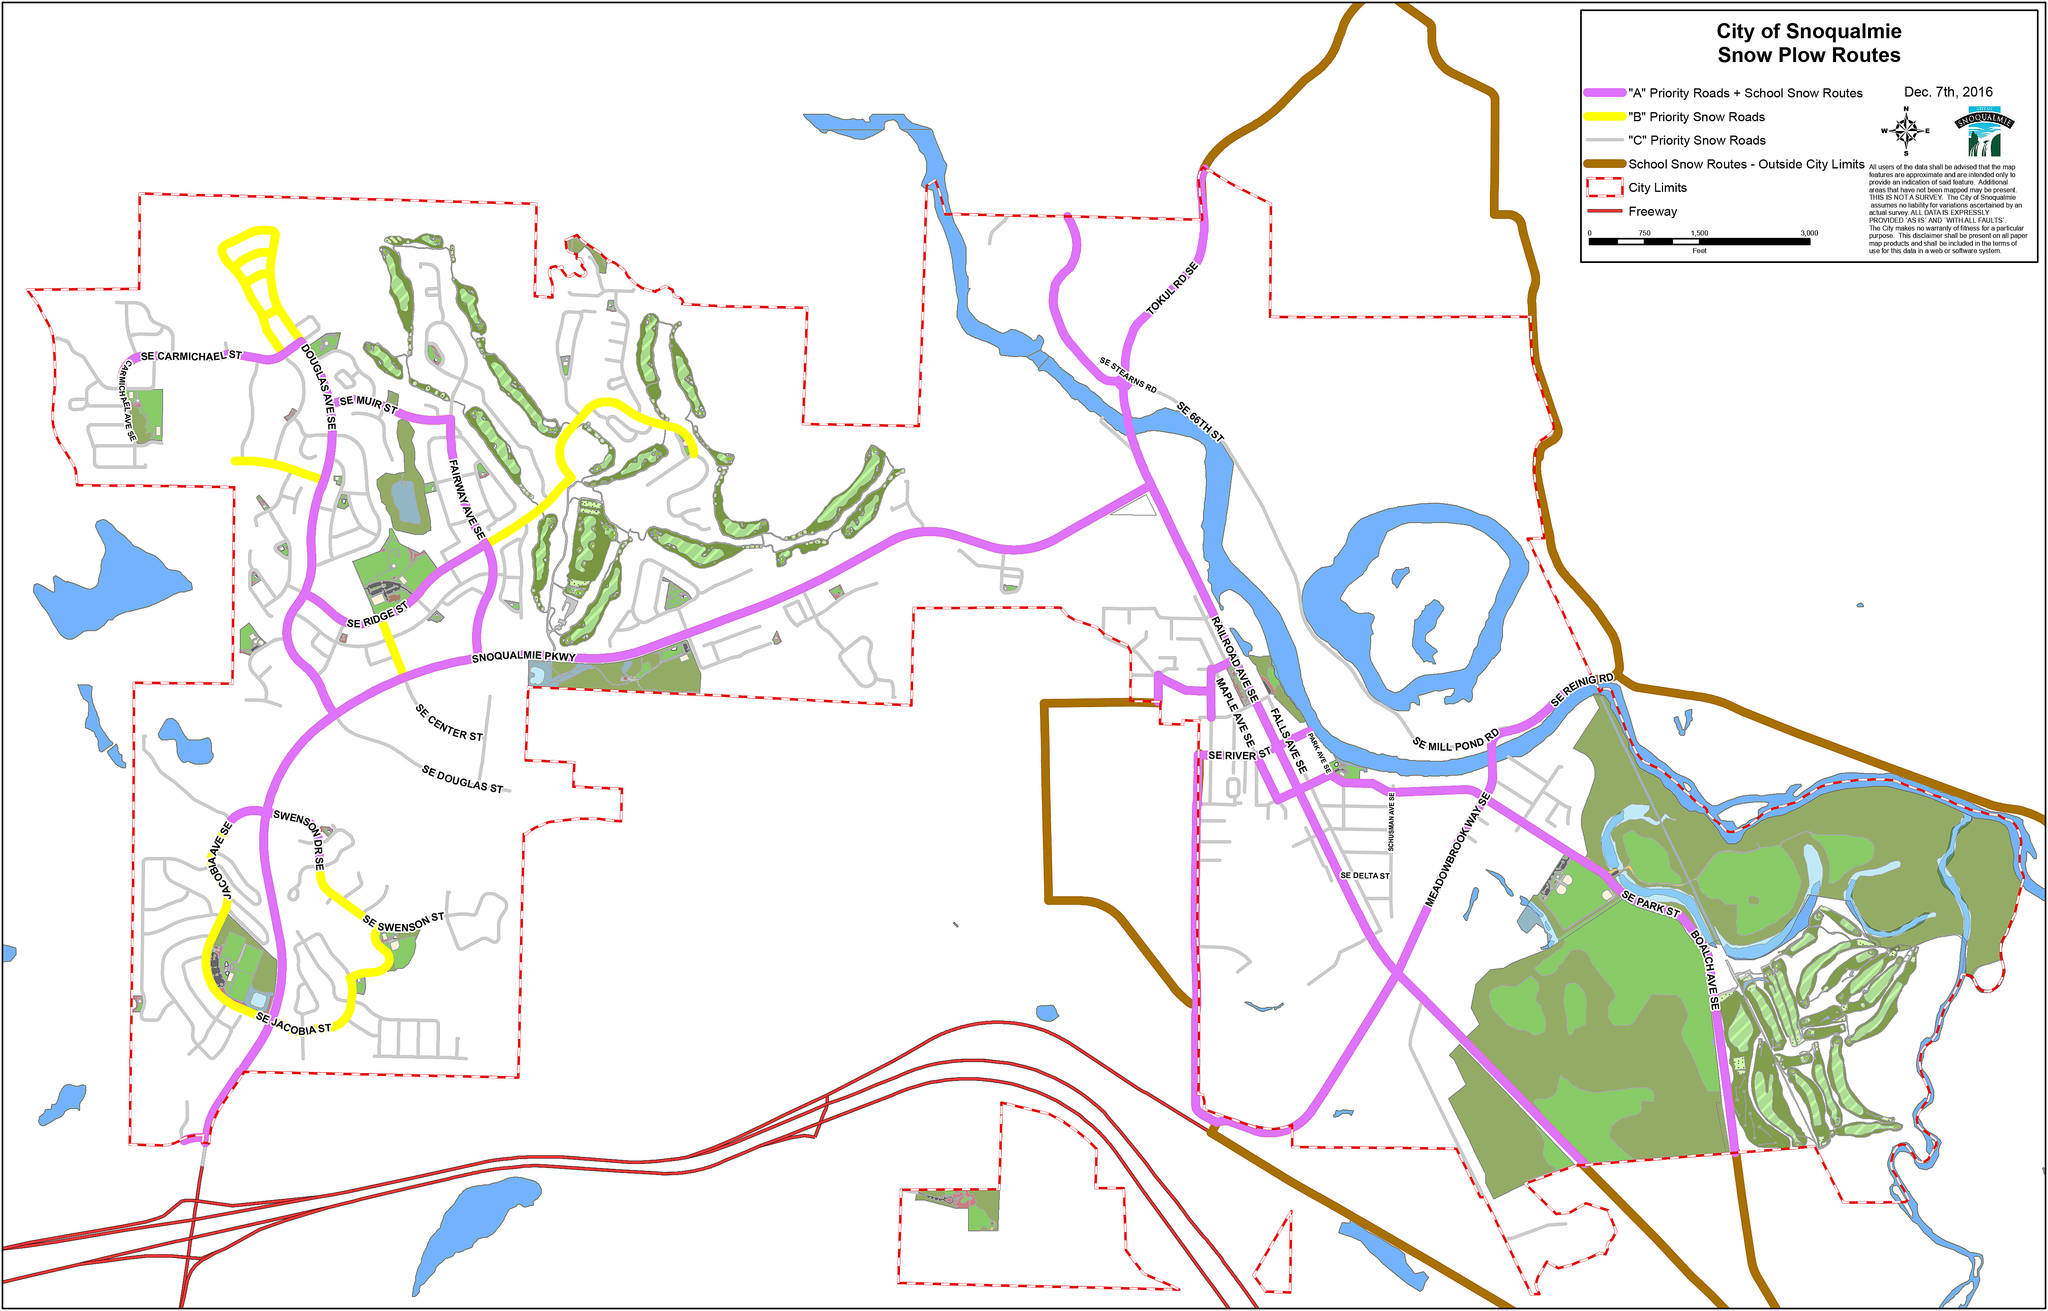 Courtesy of the city of Snoqualmie Snoqualmie’s snow plow routes. The pink line covers the “A” priority roads, the yellow line covers the “B” priority roads, and the grey lines cover the “C” priority roads.